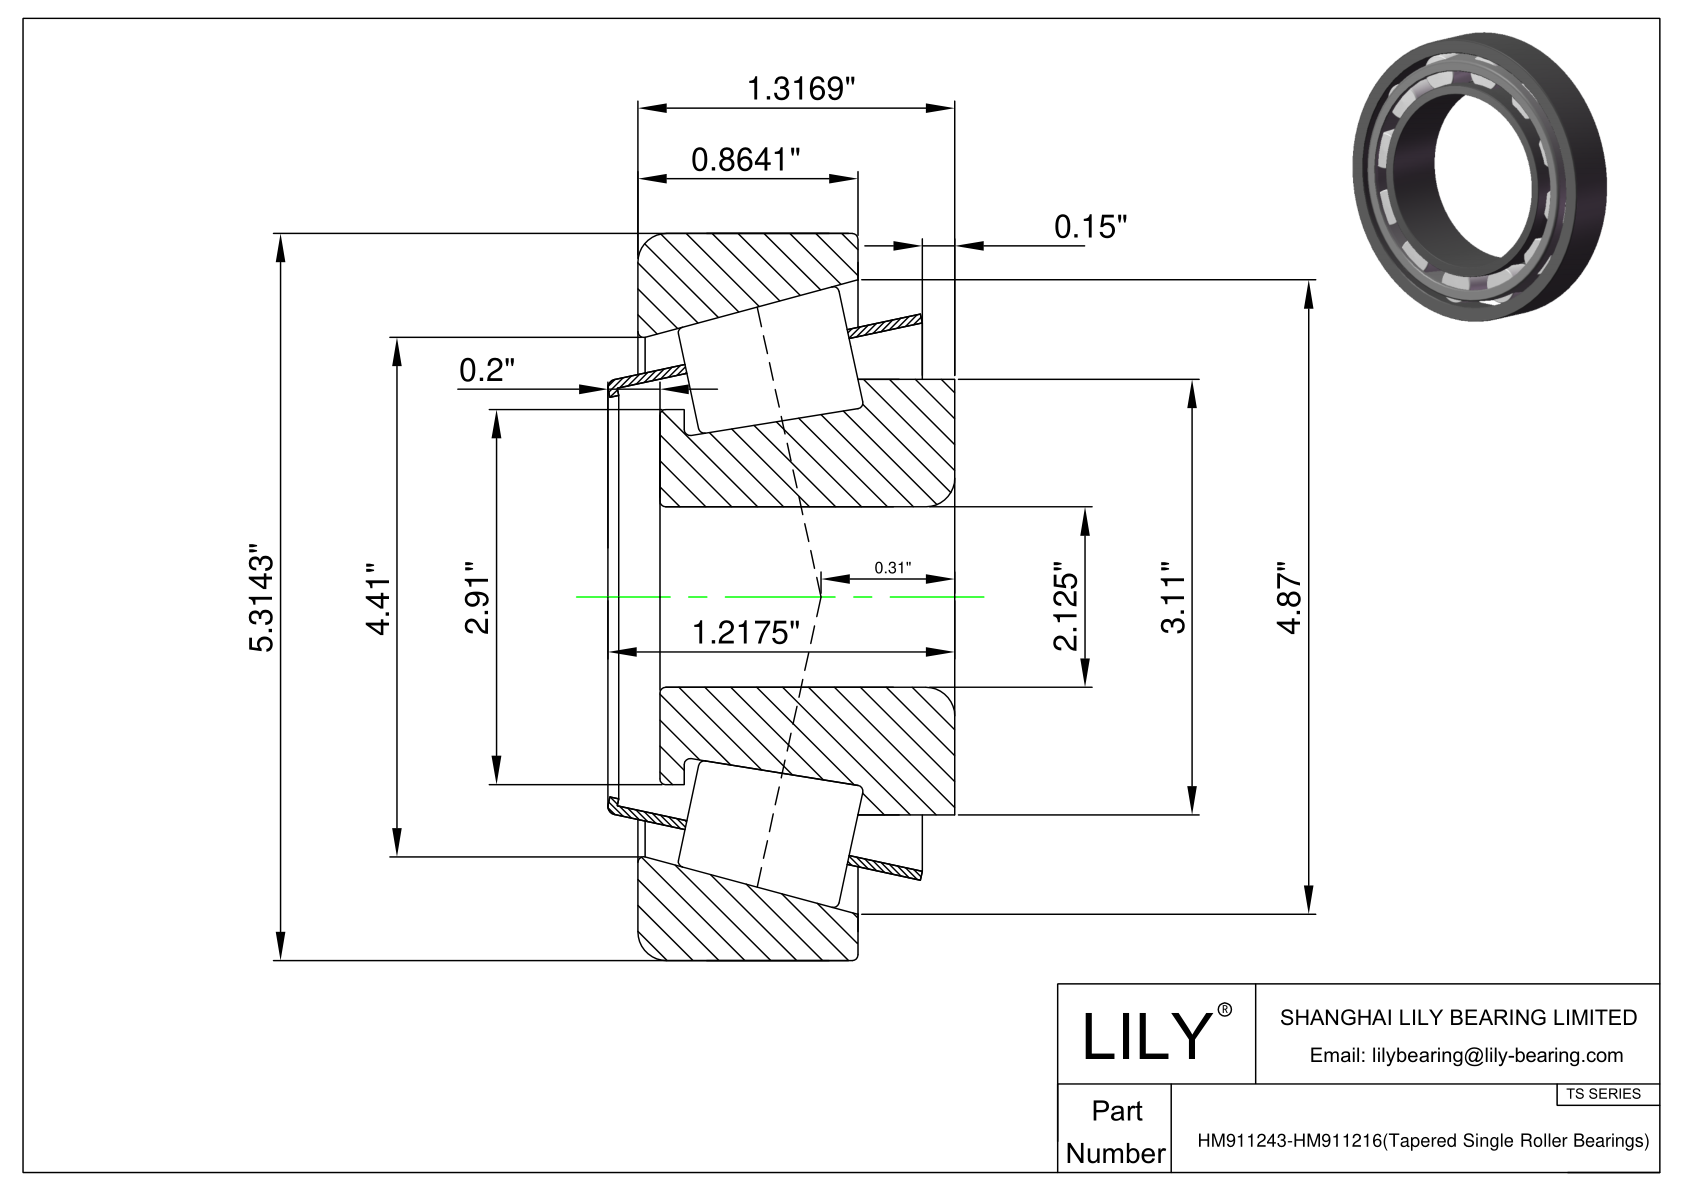 HM911243-HM911216 TS (Tapered Single Roller Bearings) (Imperial) cad drawing